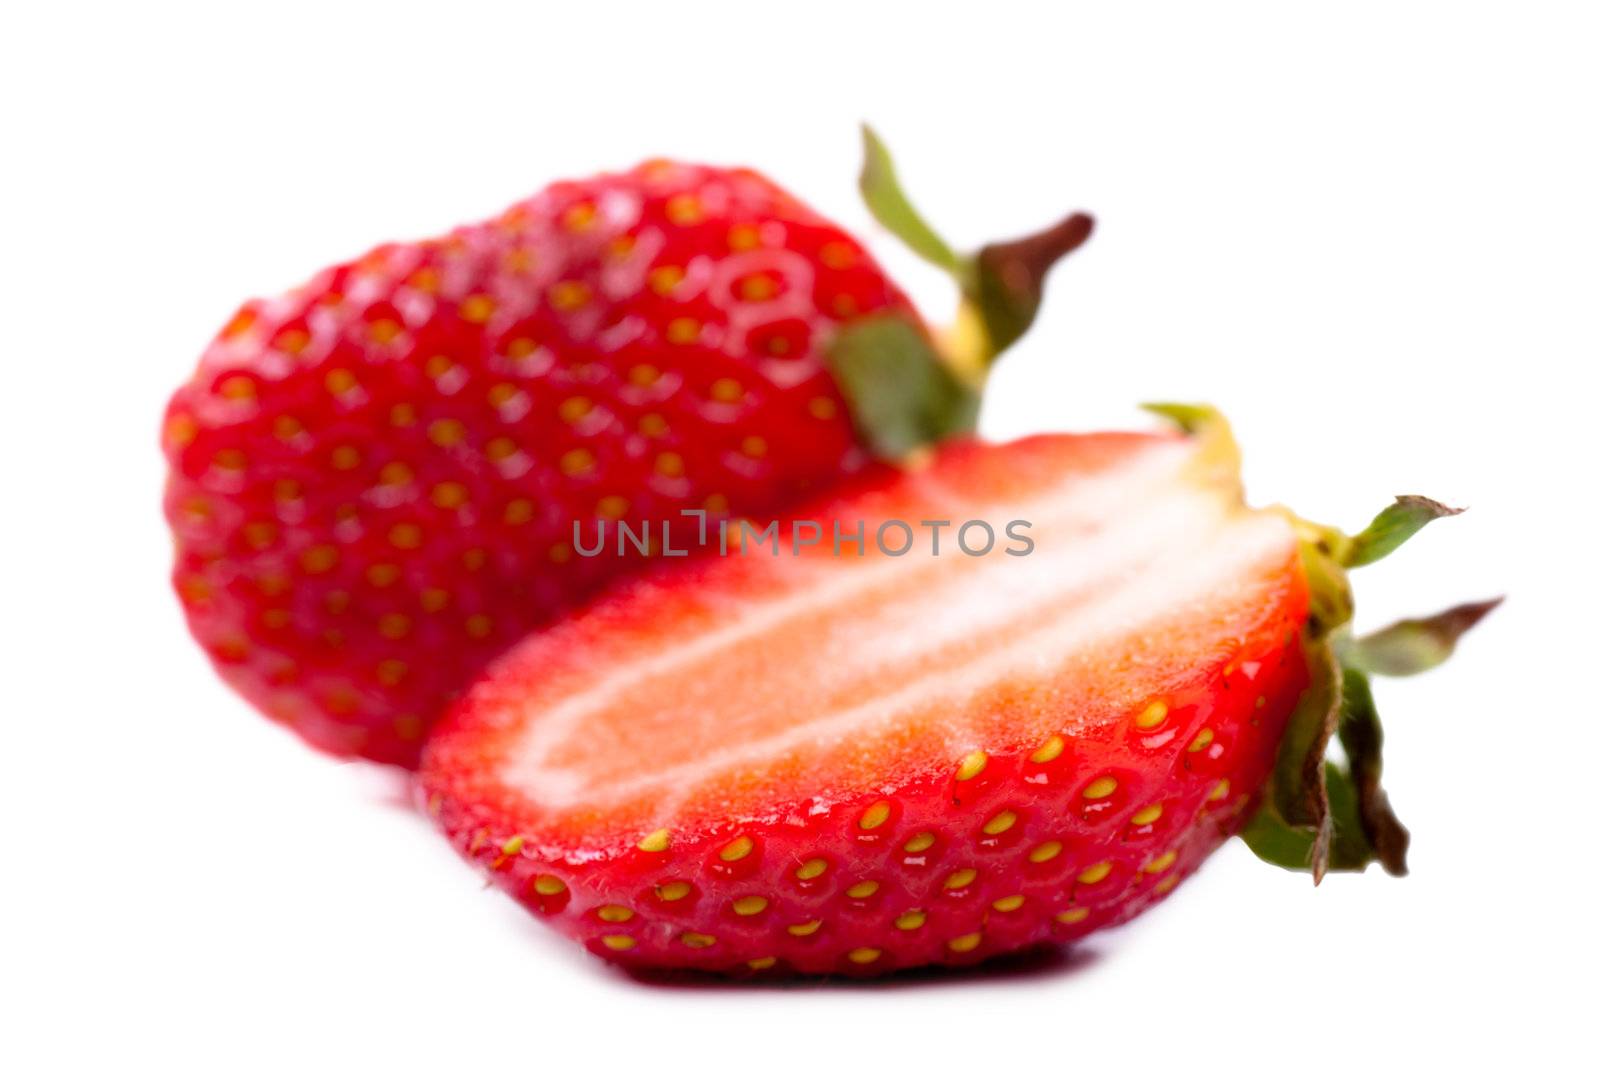 Macro view of a fresh strawberry over white background